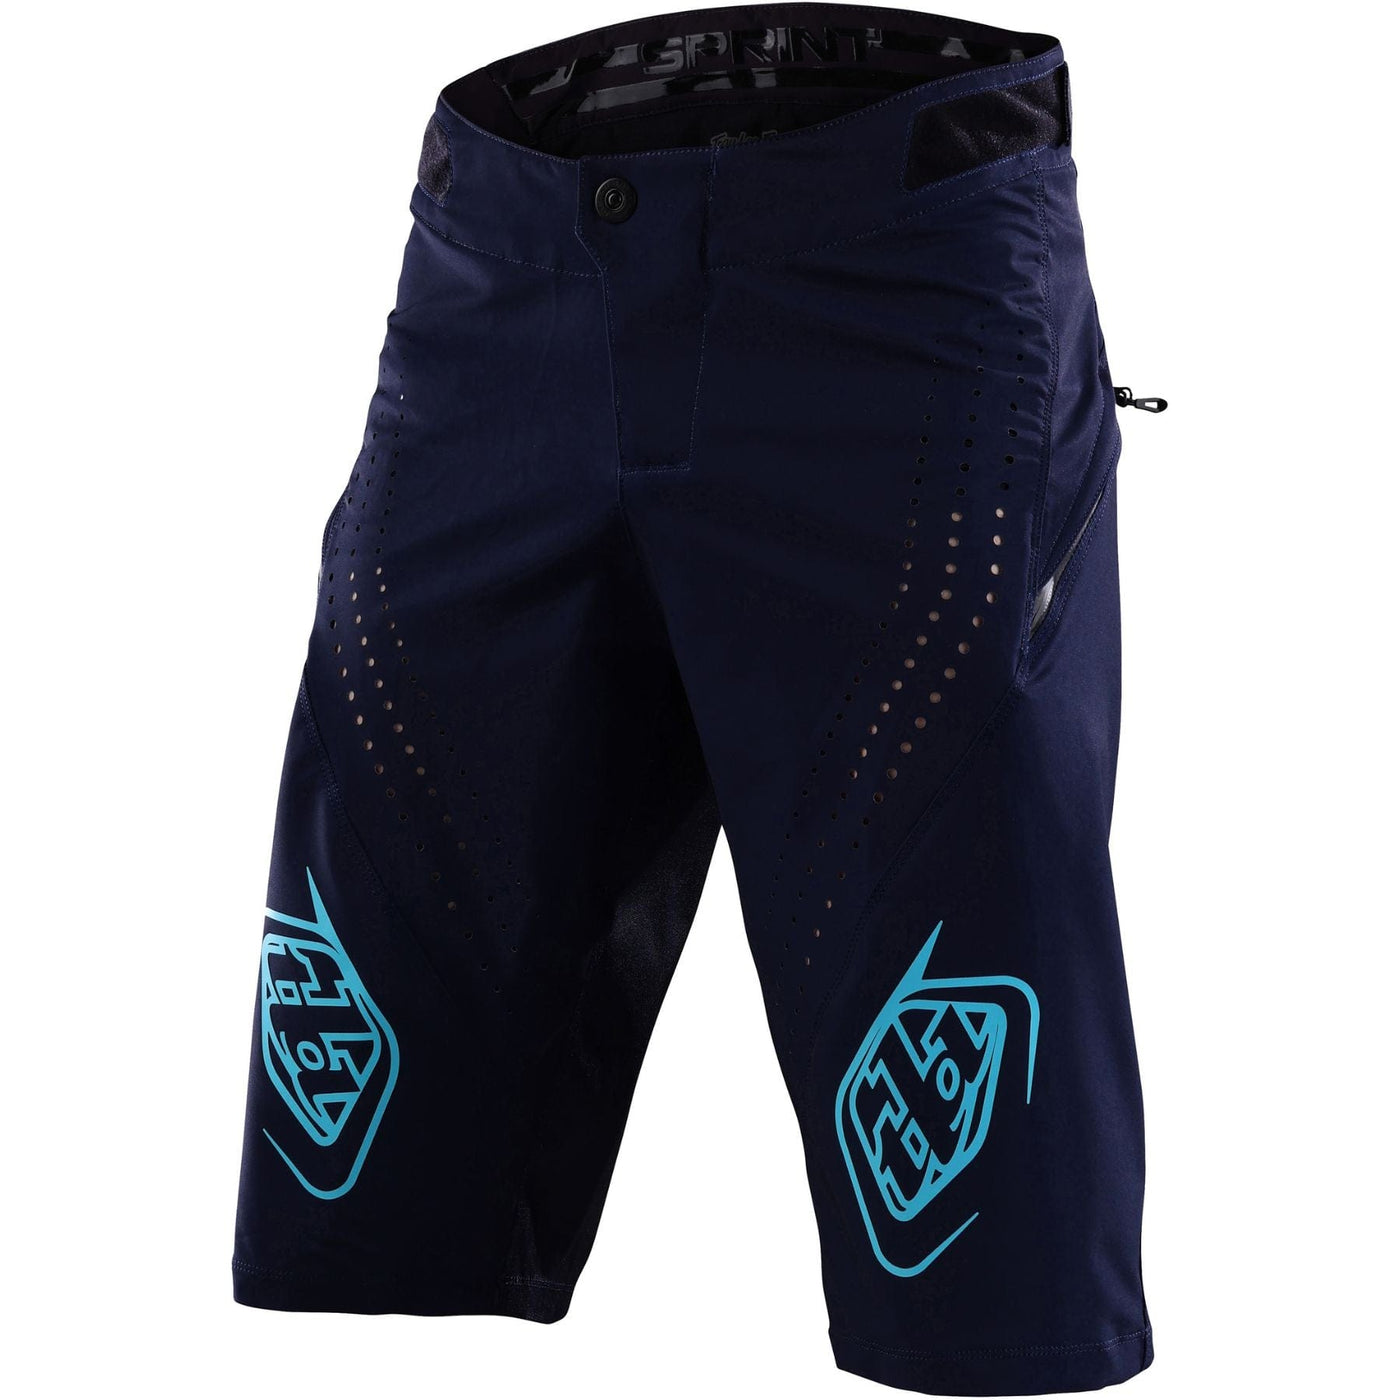 Troy Designs Sprint Shorts Mono - Navy 8Lines Shop - Fast Shipping